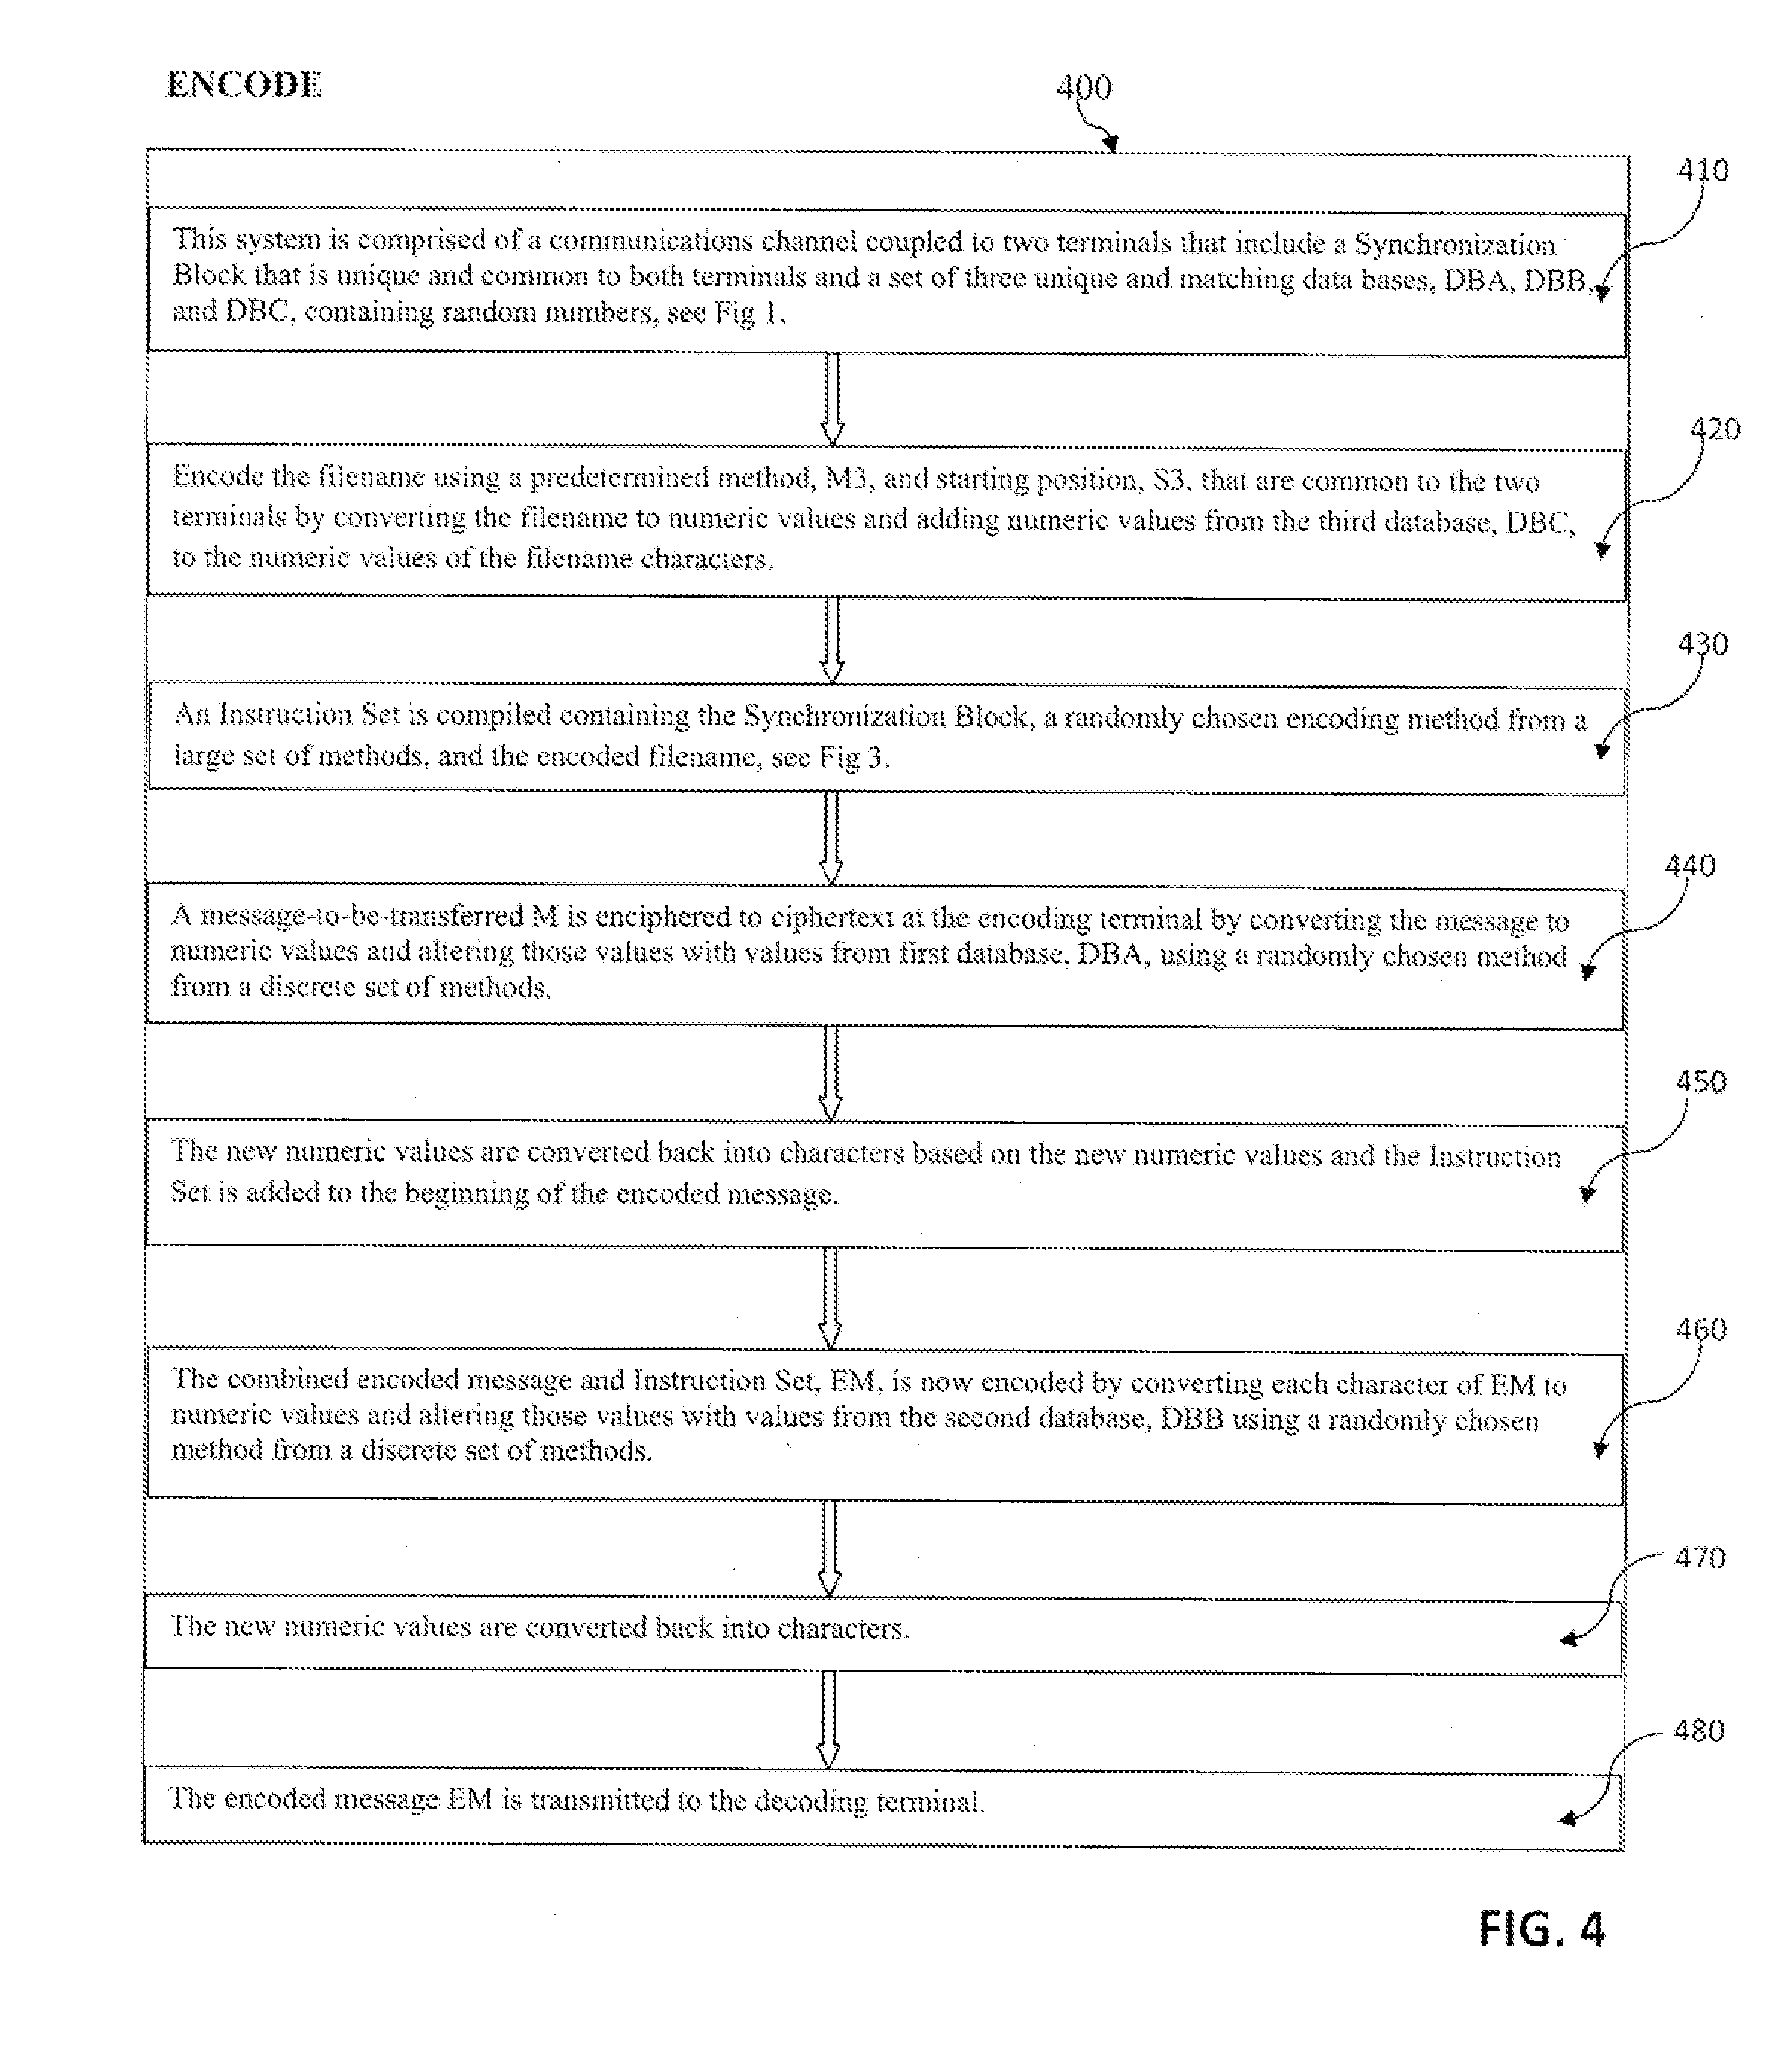 System and method for encryption and decryption of data transferred between computer systems